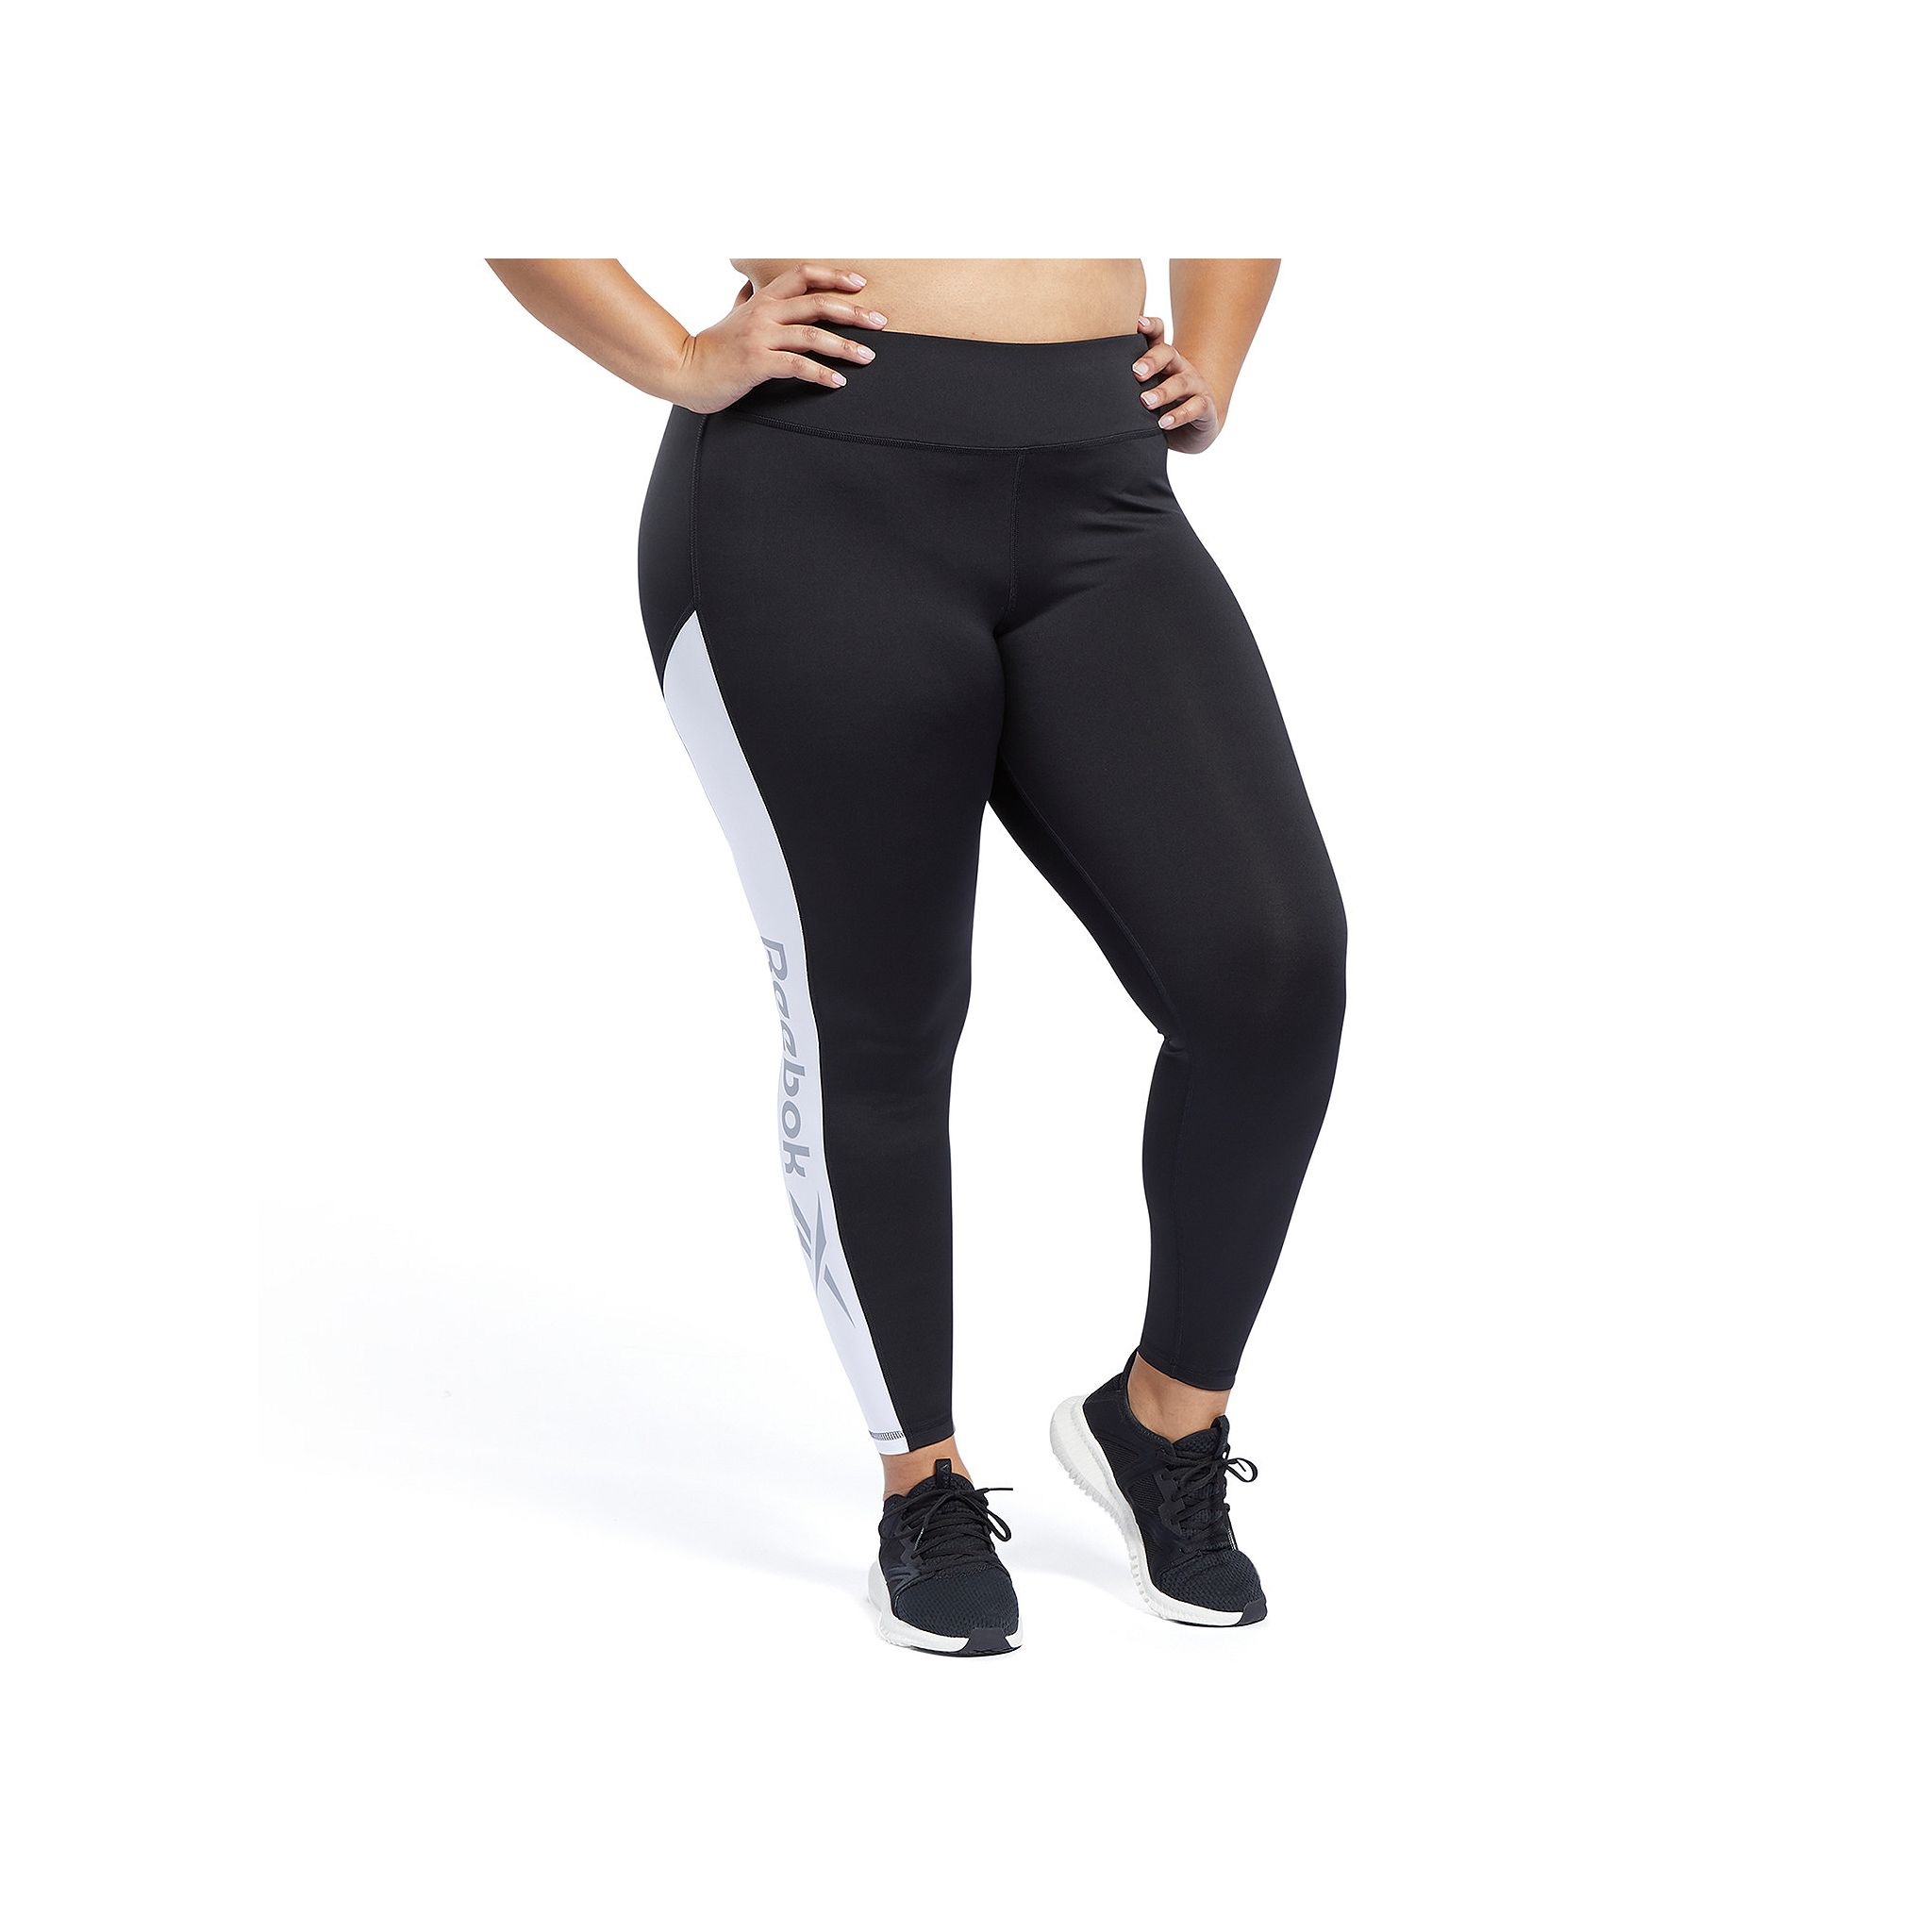 Women's Compression Leggings: Shop Active Bottoms for Your Wardrobe